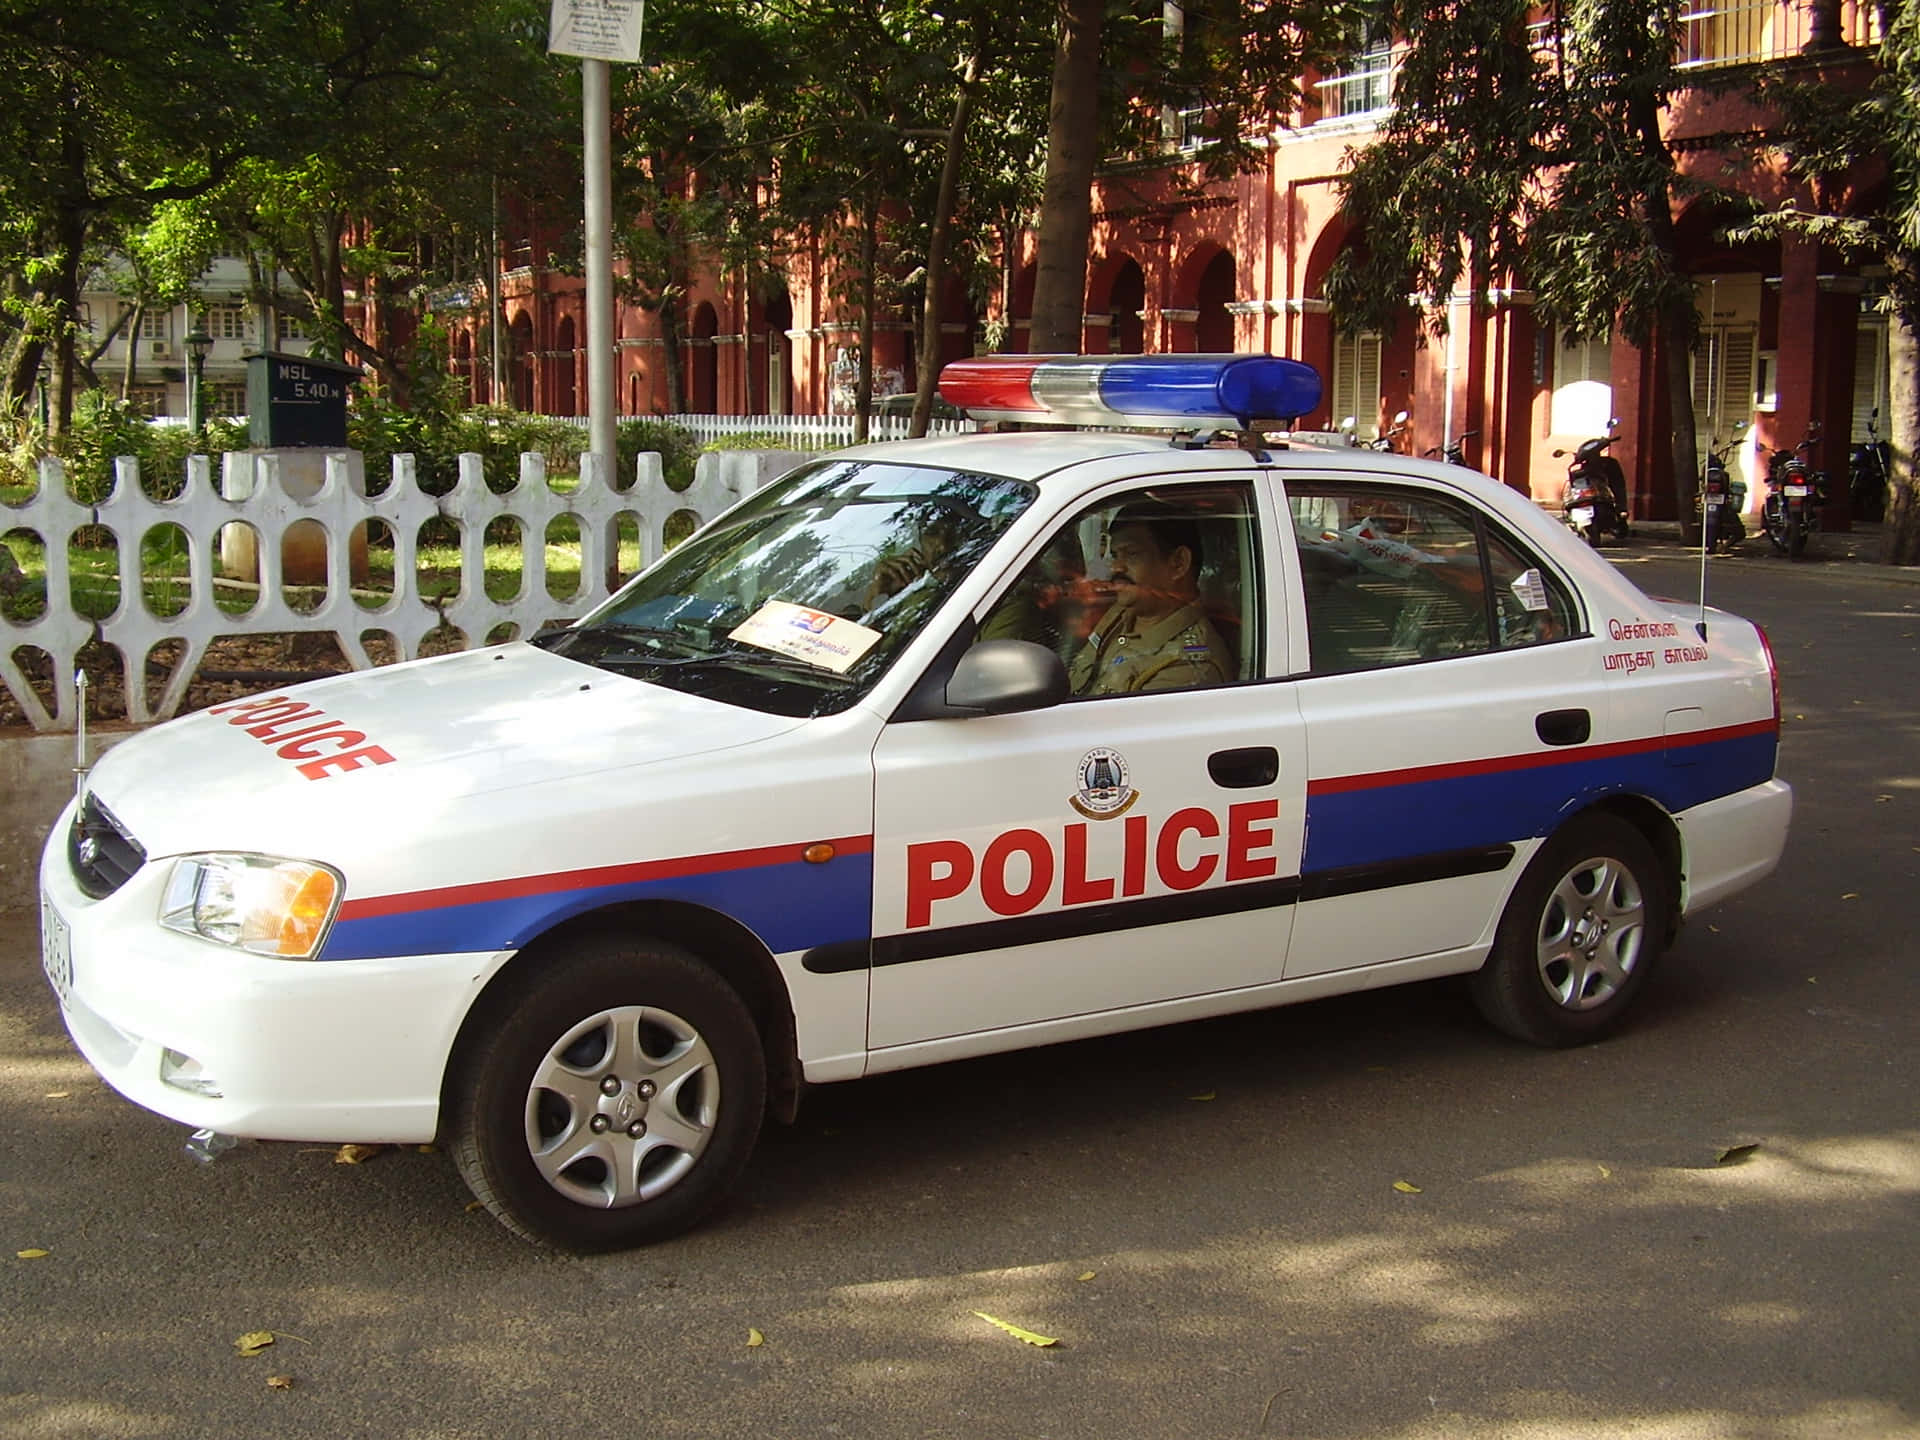 A Police Car Patrolling the City Streets